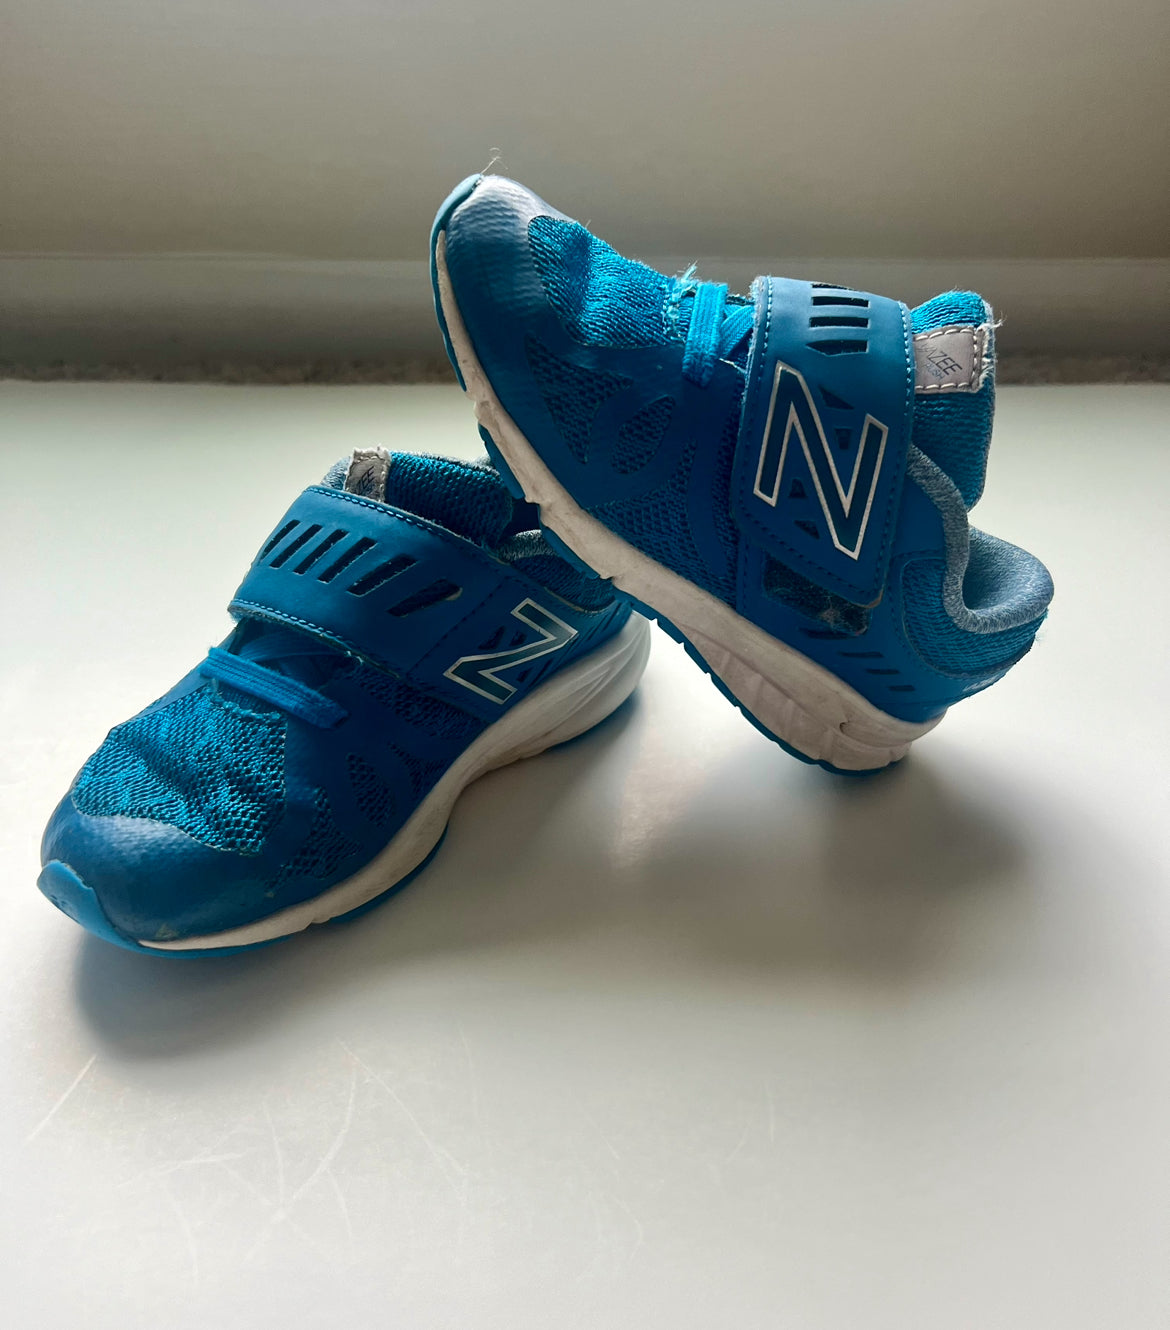 Toddler Size 10 New Balance Sneakers